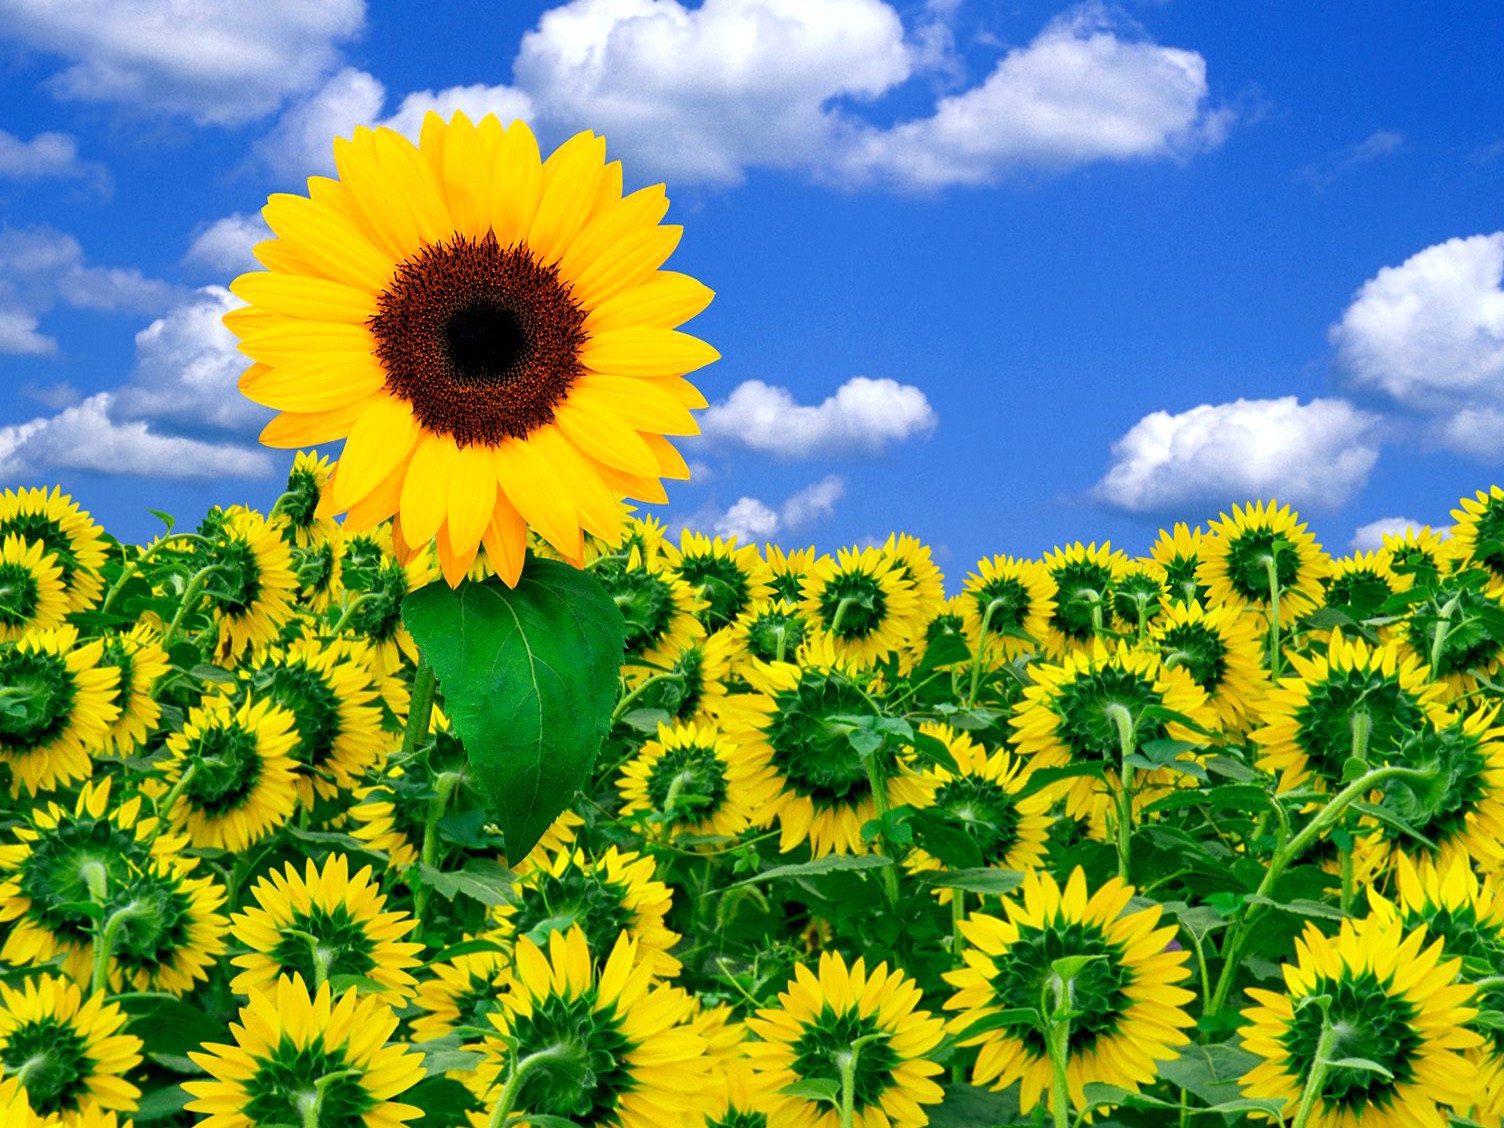 A Little Sunshine Flower Wallpapers Nature Images Hd - Natural Flowers Photo Hd - HD Wallpaper 